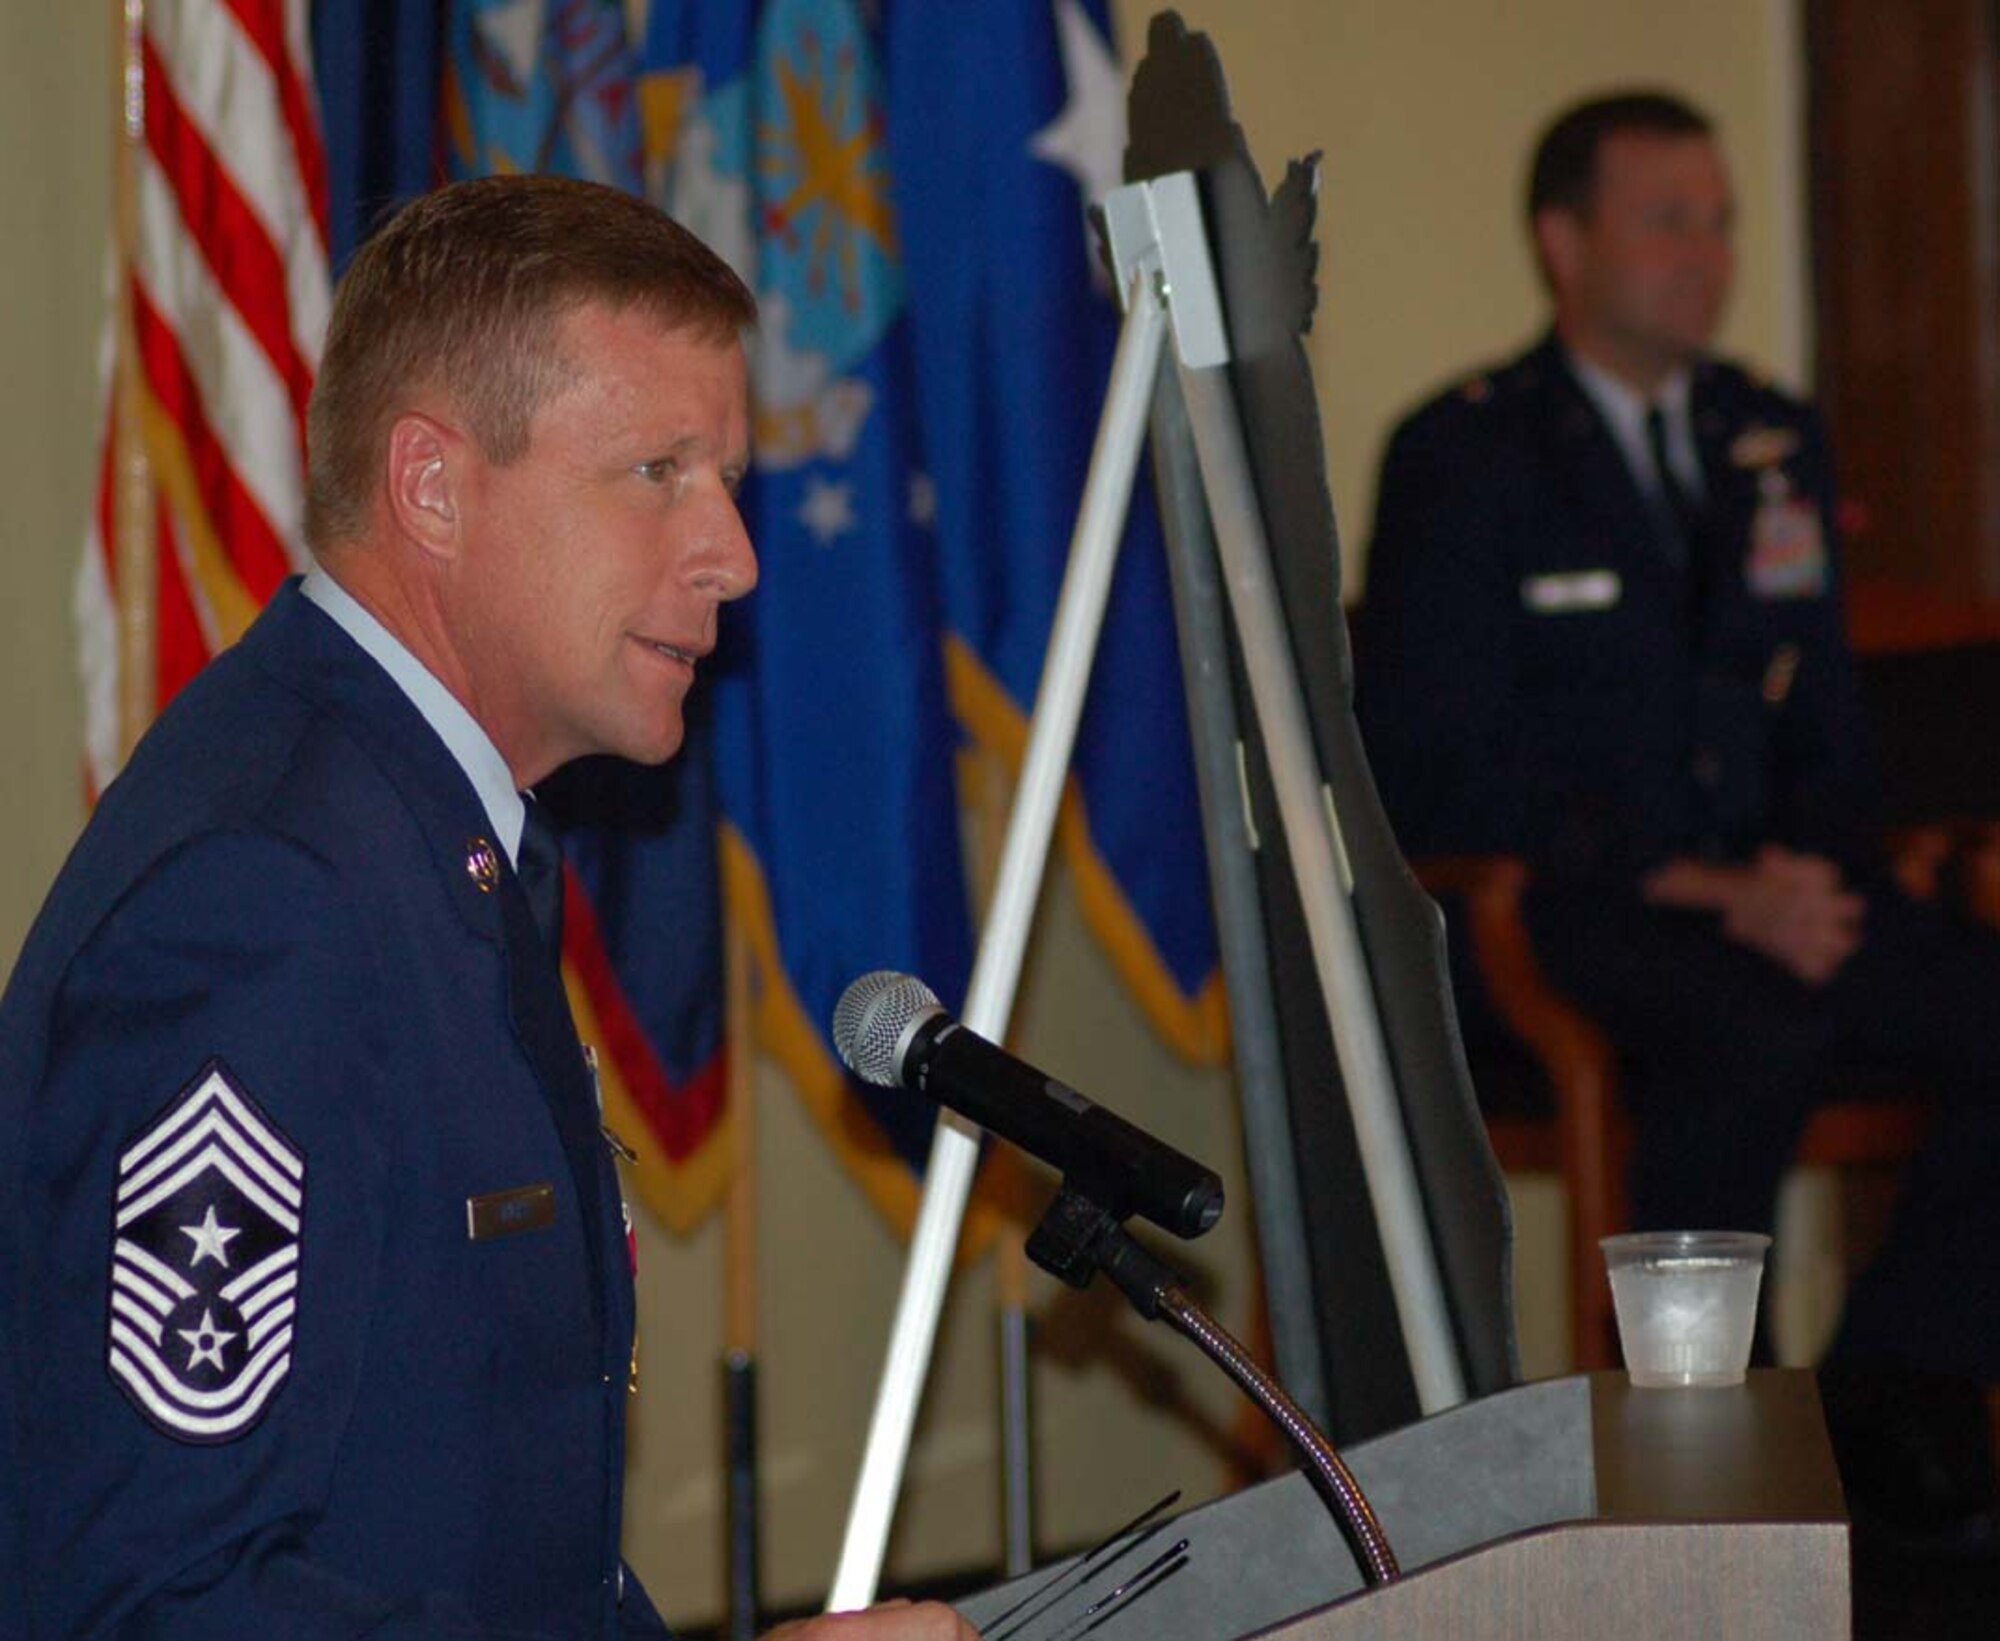 Chief Master Sgt. Robert Wicks, 36th Wing command chief master sergeant, addresses the Airmen and Sailors present for his retirement ceremony Wednesday at the Oceanview Community Center.  (Photo by Tech. Sgt. Brian Bahret/The Pacific Edge)